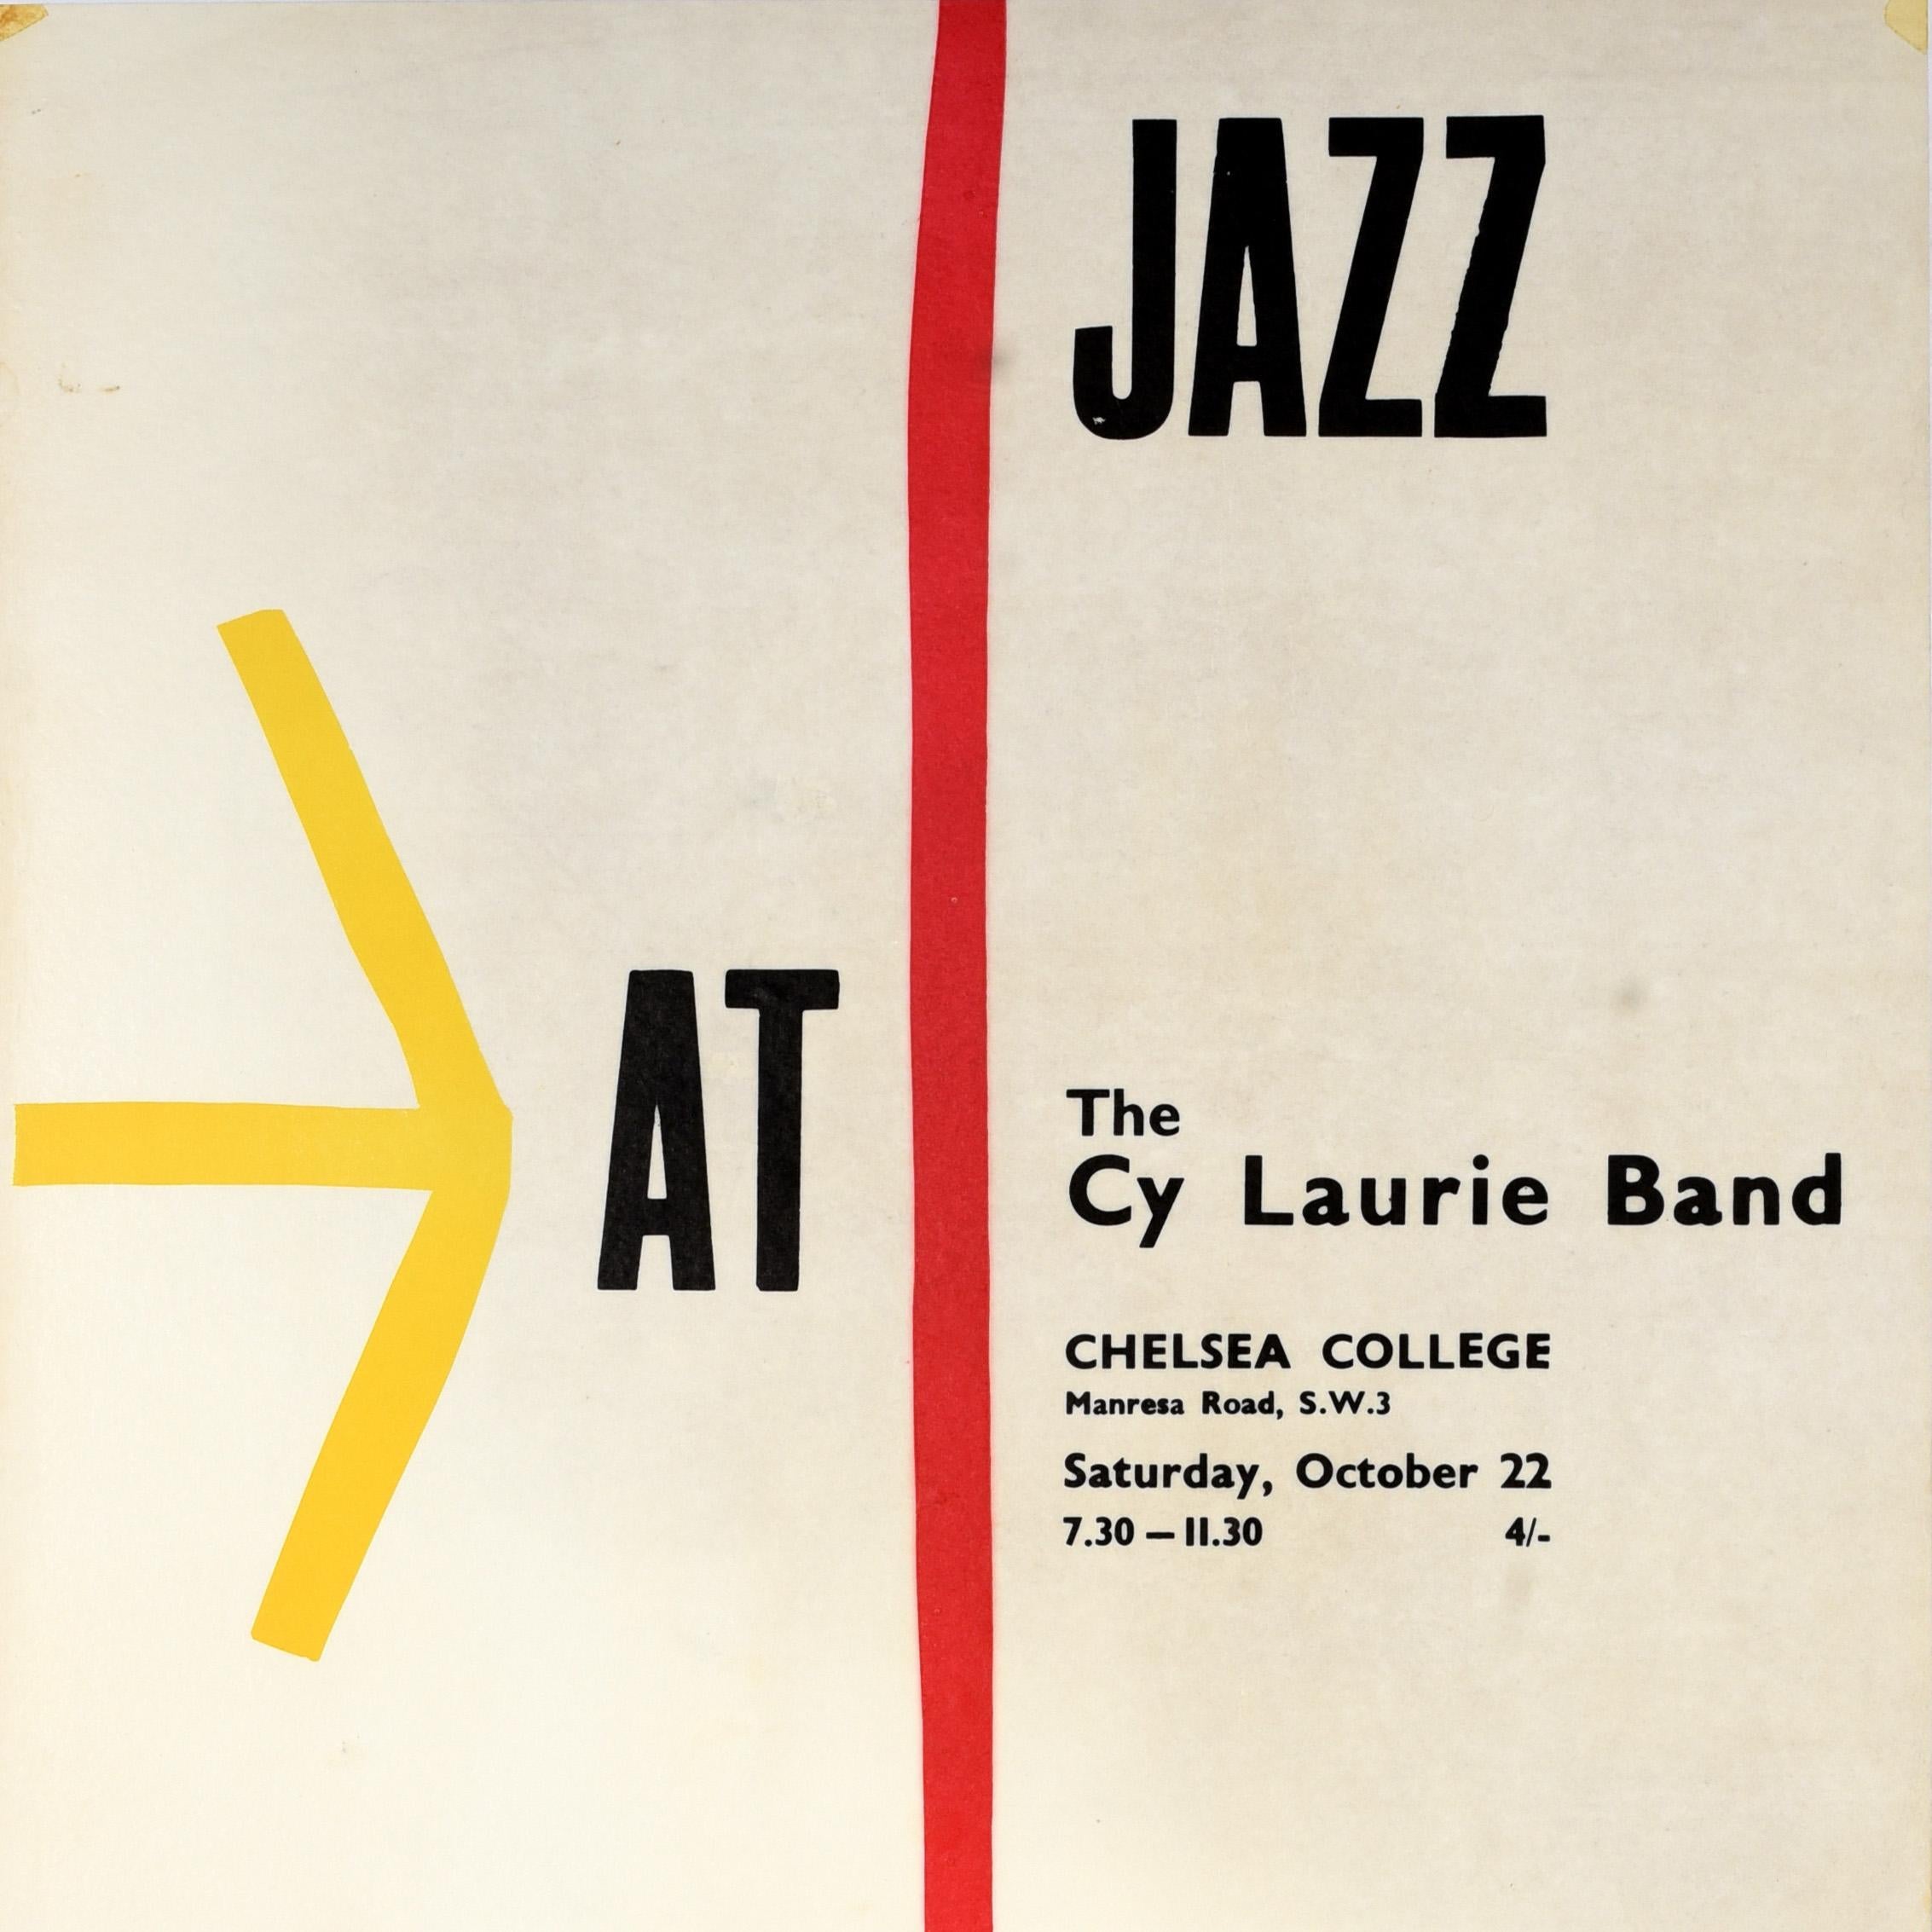 Original Vintage Music Advertising Poster Jazz At Chelsea Cy Laurie Band London - White Print by Unknown